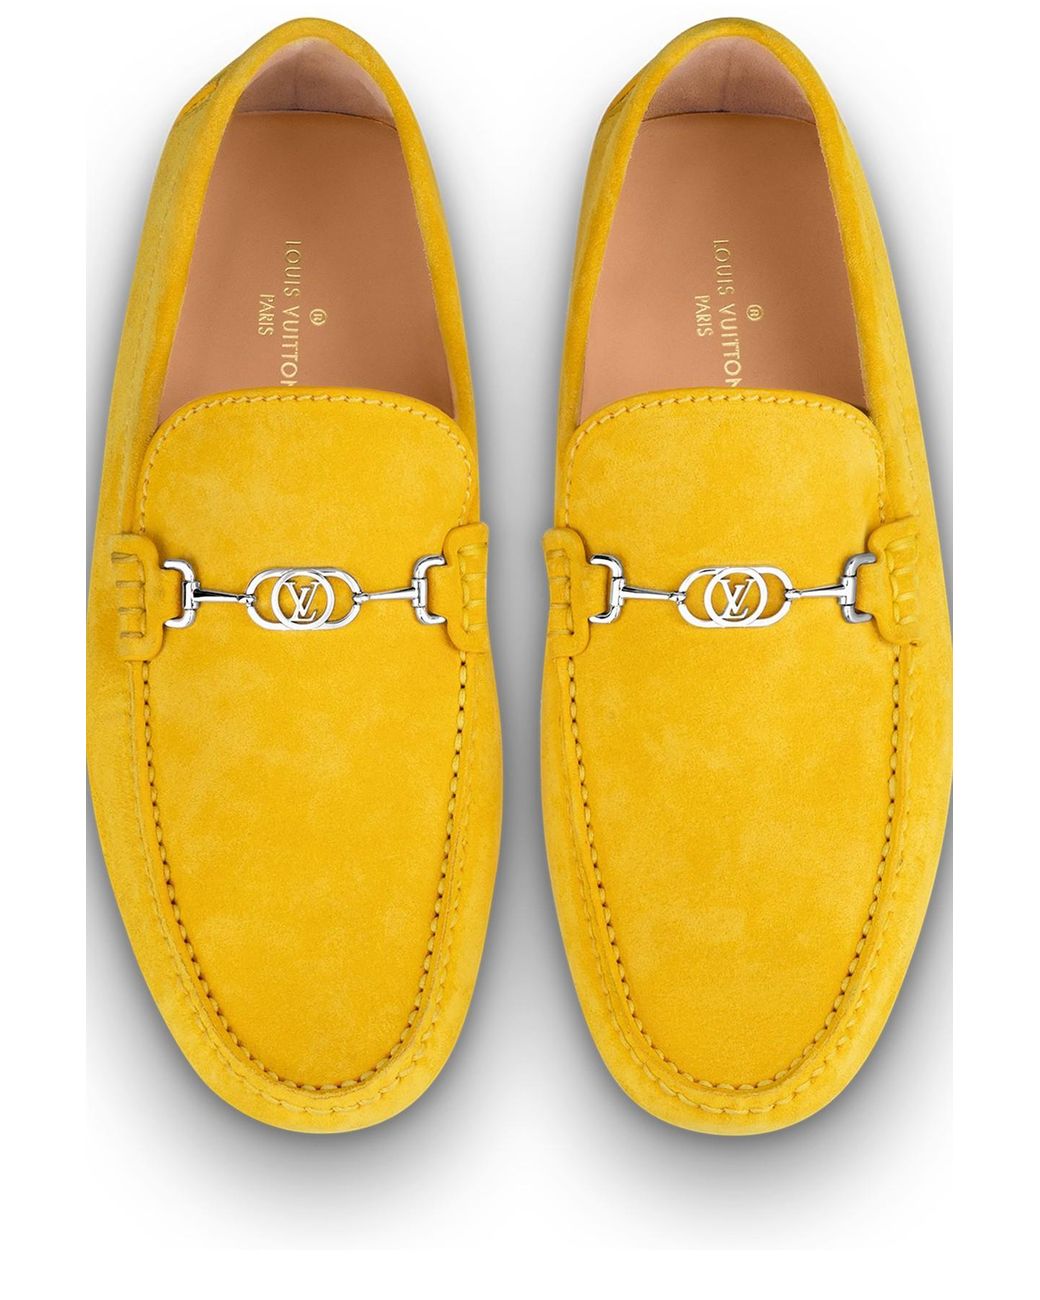 Louis Vuitton Men Monte Carlo Loafer US8.5 LV7.5 Yellow Leather Moccasin  Slip On